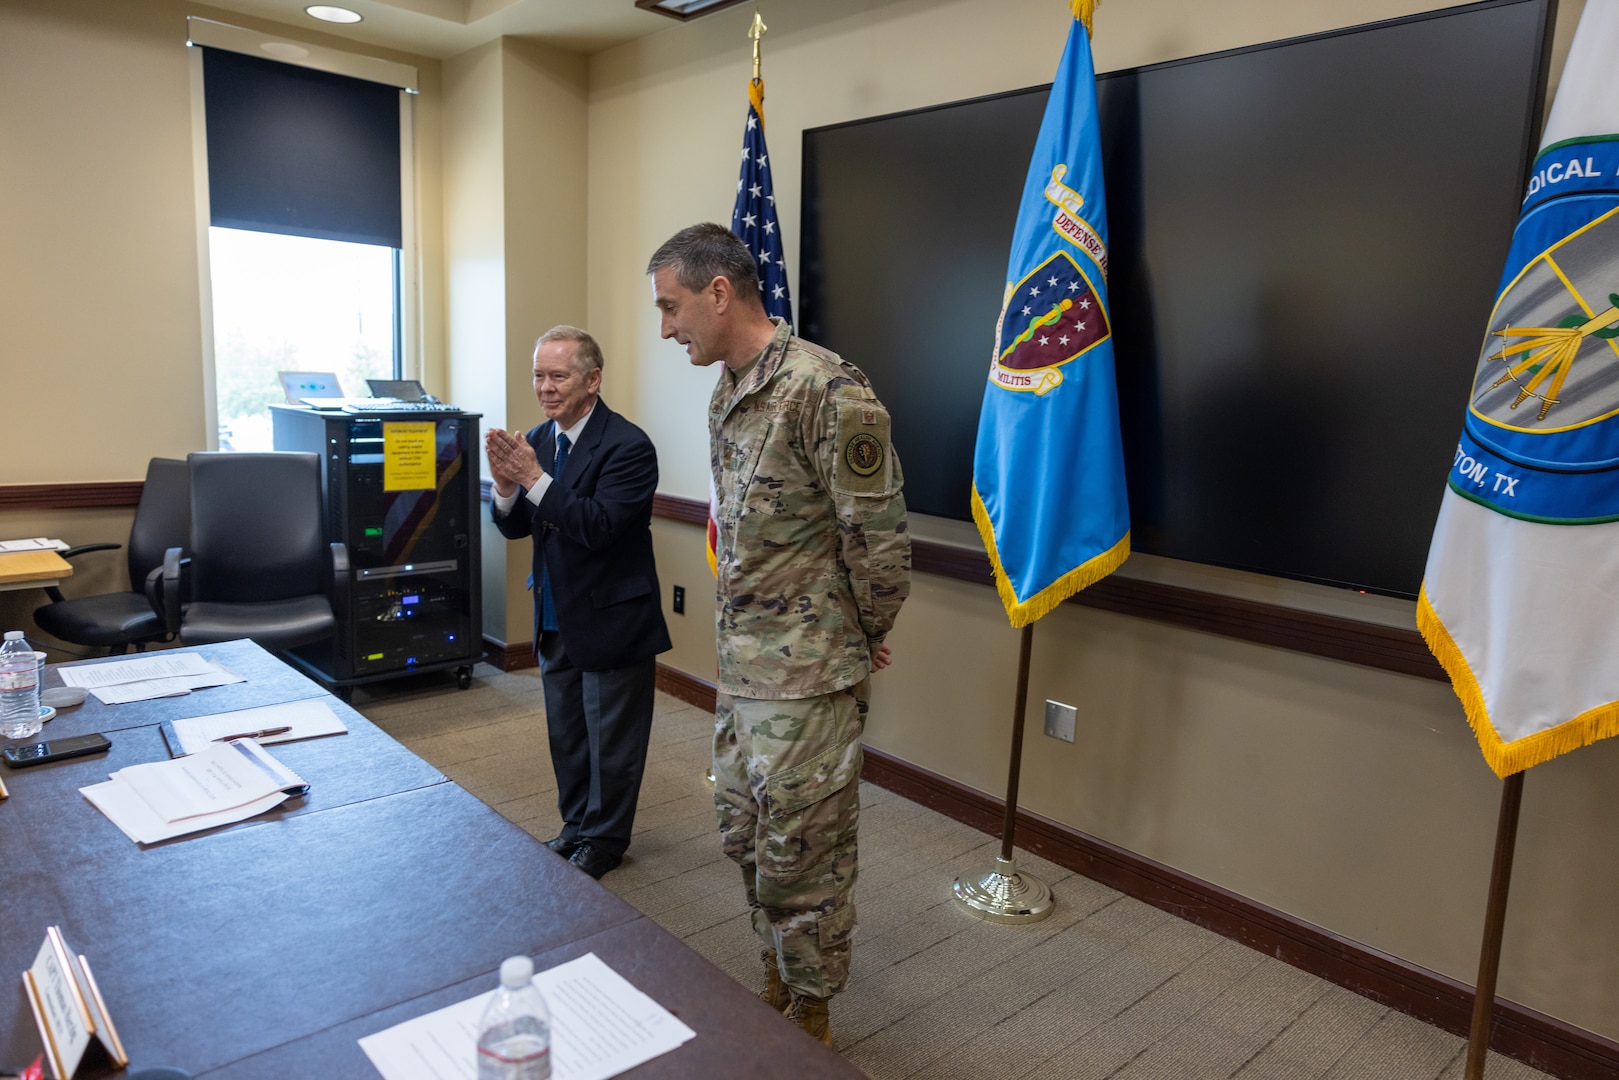 Dr. Barclay Butler, Assistant Director for Support, Defense Health Agency, congratulates Air Force Col. David Walmsley after he became the sixth Commandant of the Medical Education and Training Campus (METC) during a low-key Change of Commandant ceremony held July 21.